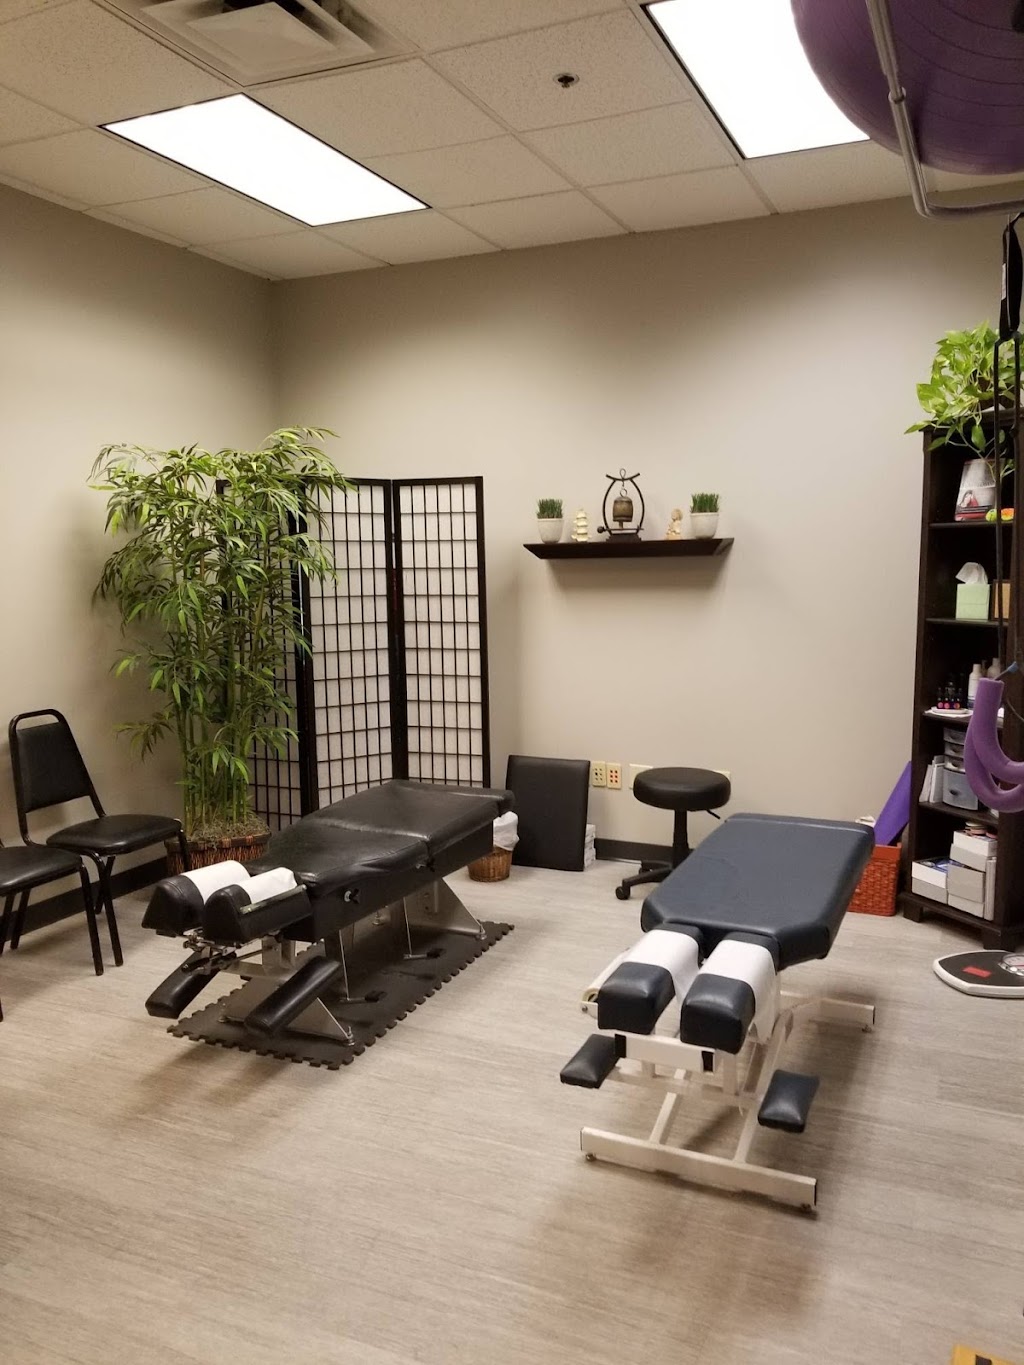 Living Pure Chiropractic and Acupuncture | 17235 N 75th Ave Suite F110, Glendale, AZ 85308 | Phone: (623) 572-4476